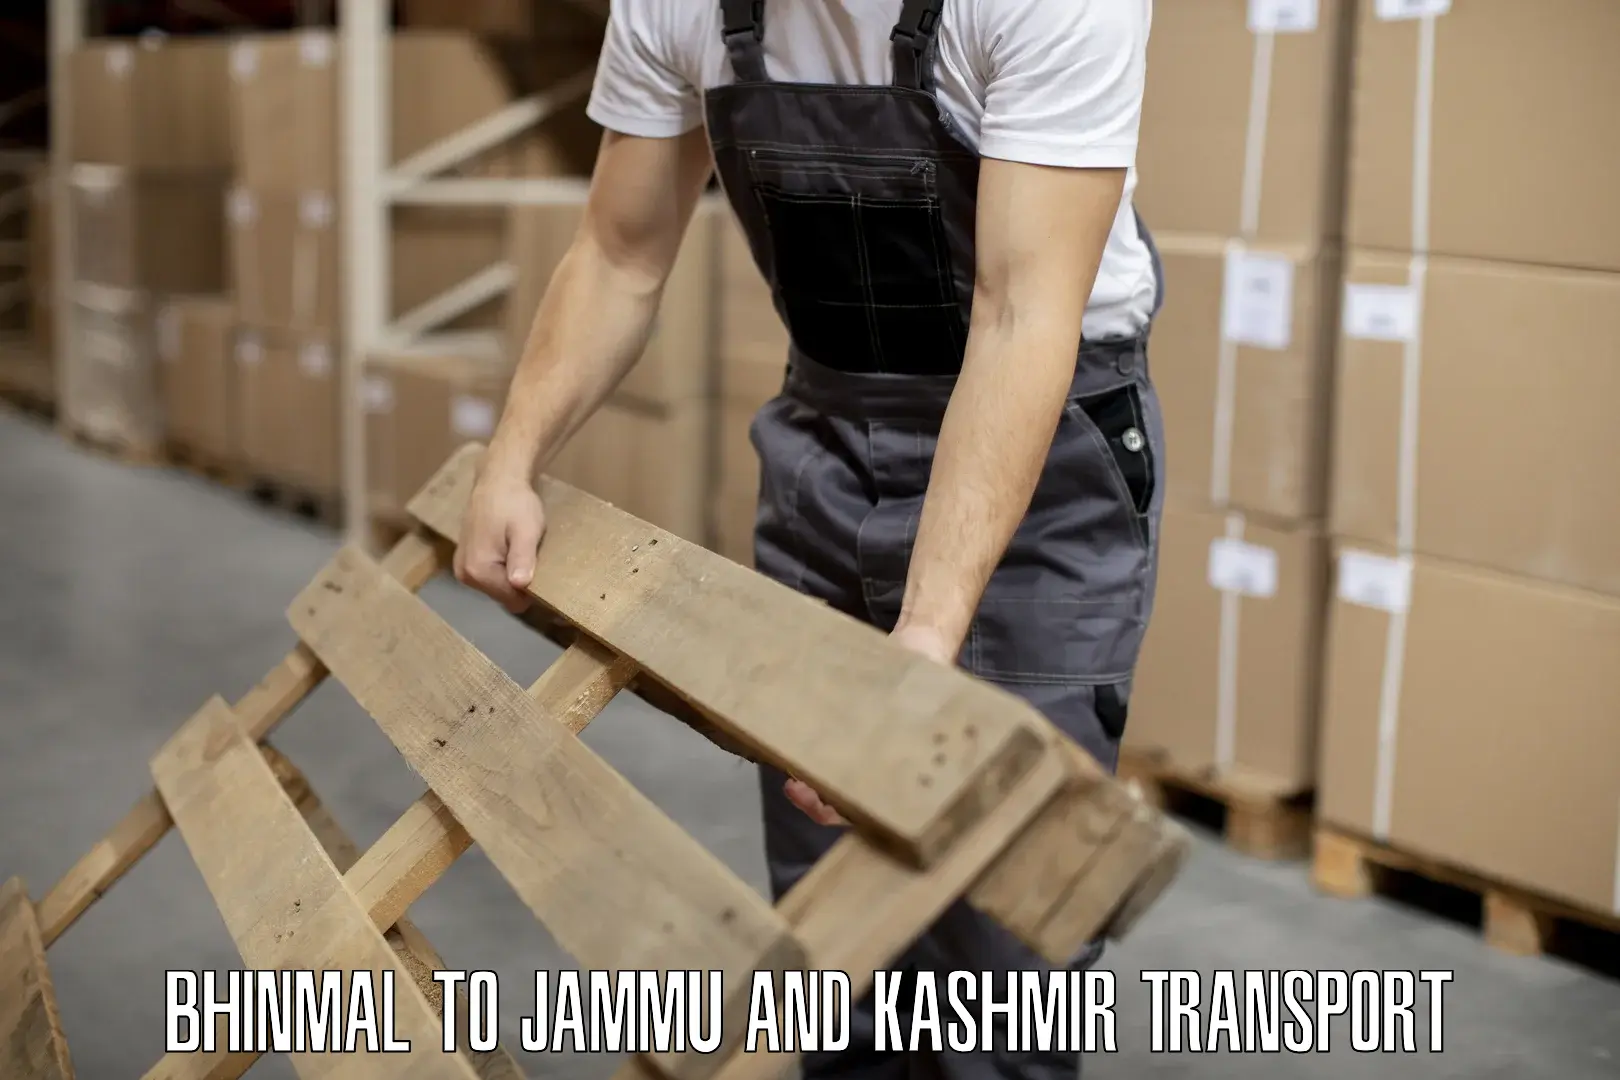 Road transport online services Bhinmal to Anantnag